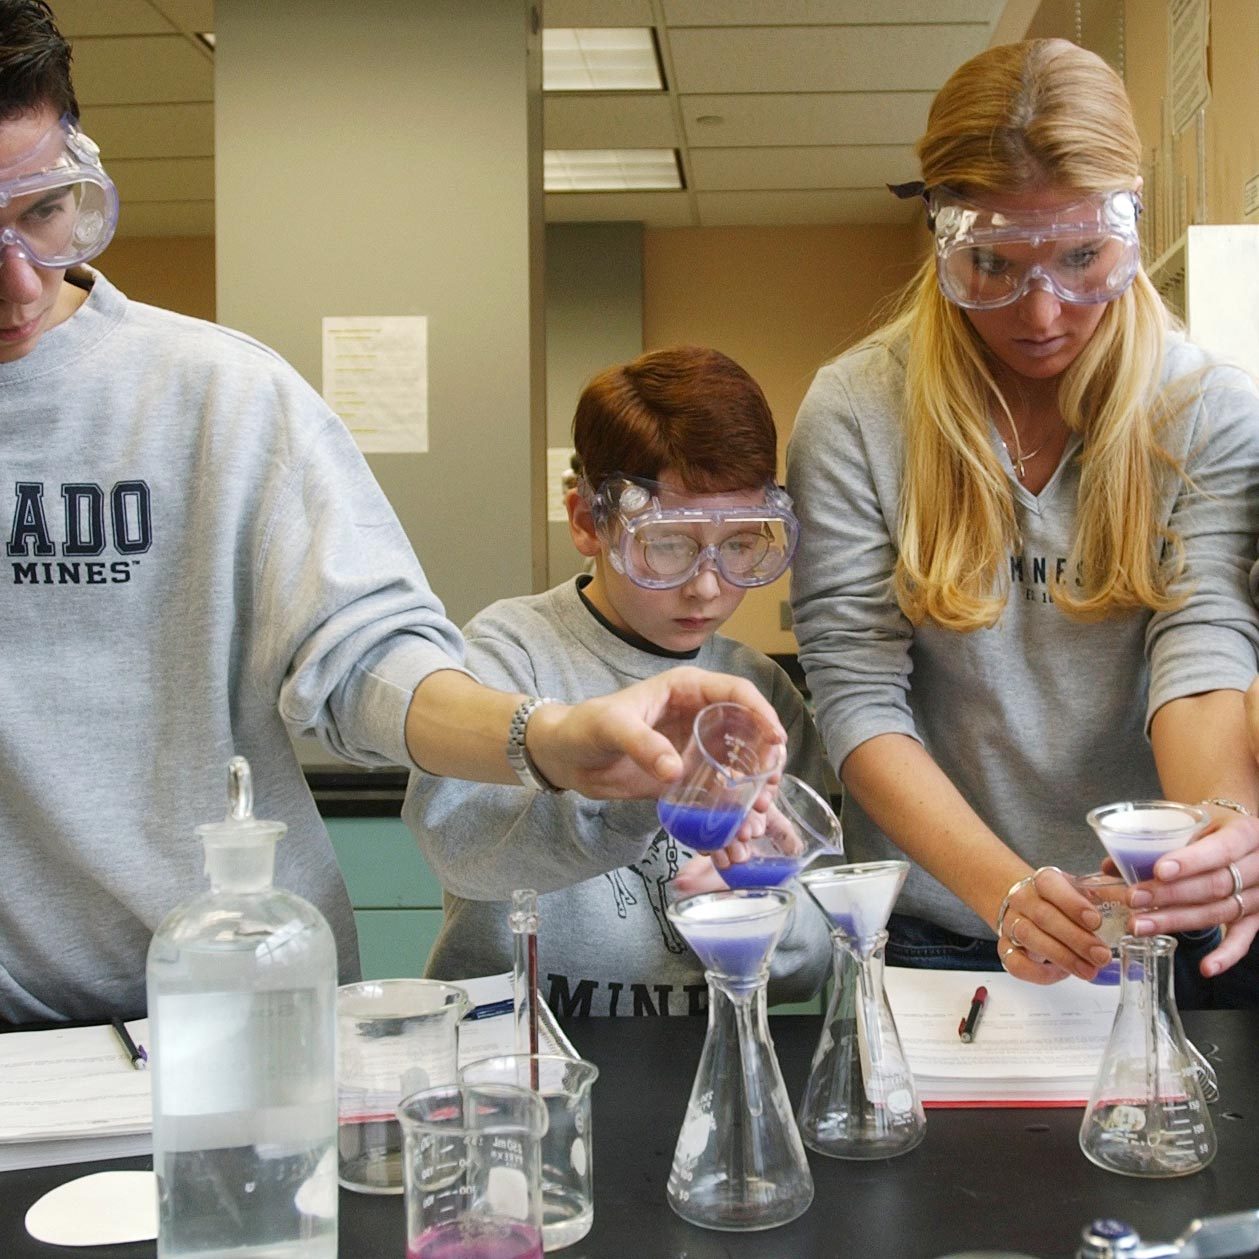 Left to right: Colorado School of Mines freshmen students: Kyle Sanoval,19, Dylan Jones, 10 years-old, Cristin Cammon, 18, and Amanda Savage, 19, work together during a Chemistry 101 lab at the school in Golden on Tuesday, December 4, 2001. They were perf